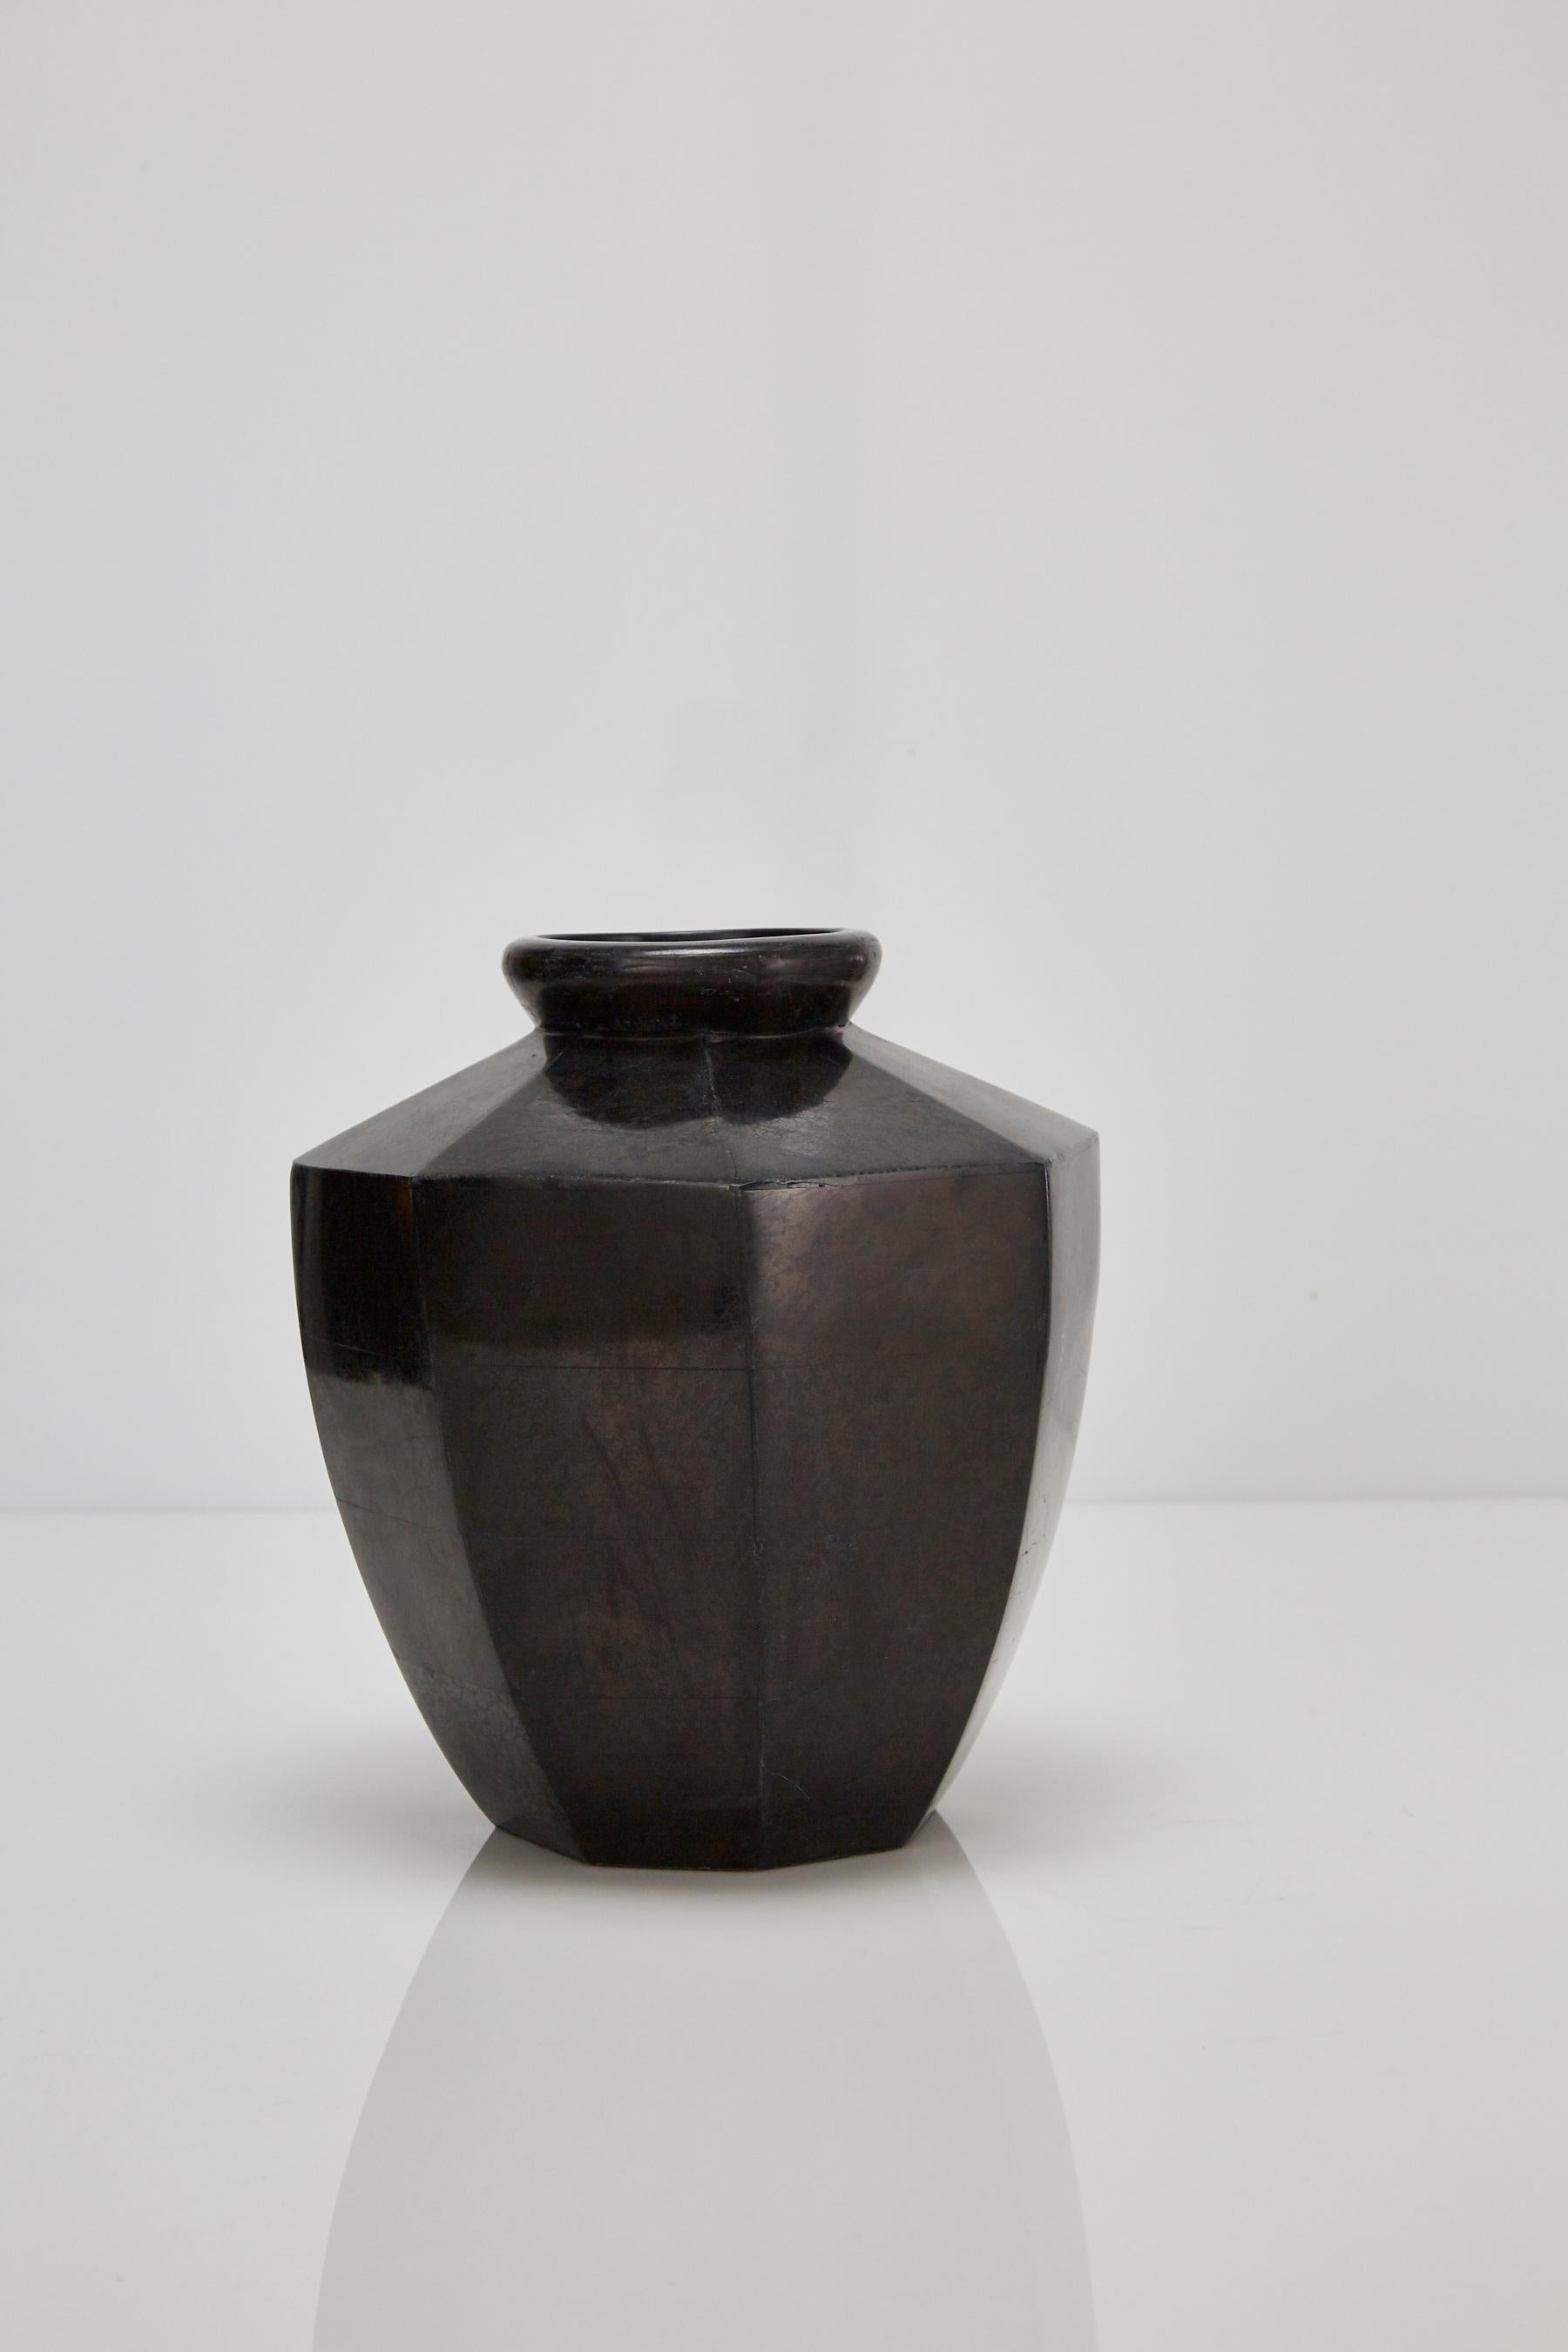 Philippine Short Octagonal Vase in Tessellated Black Stone, 1990s For Sale